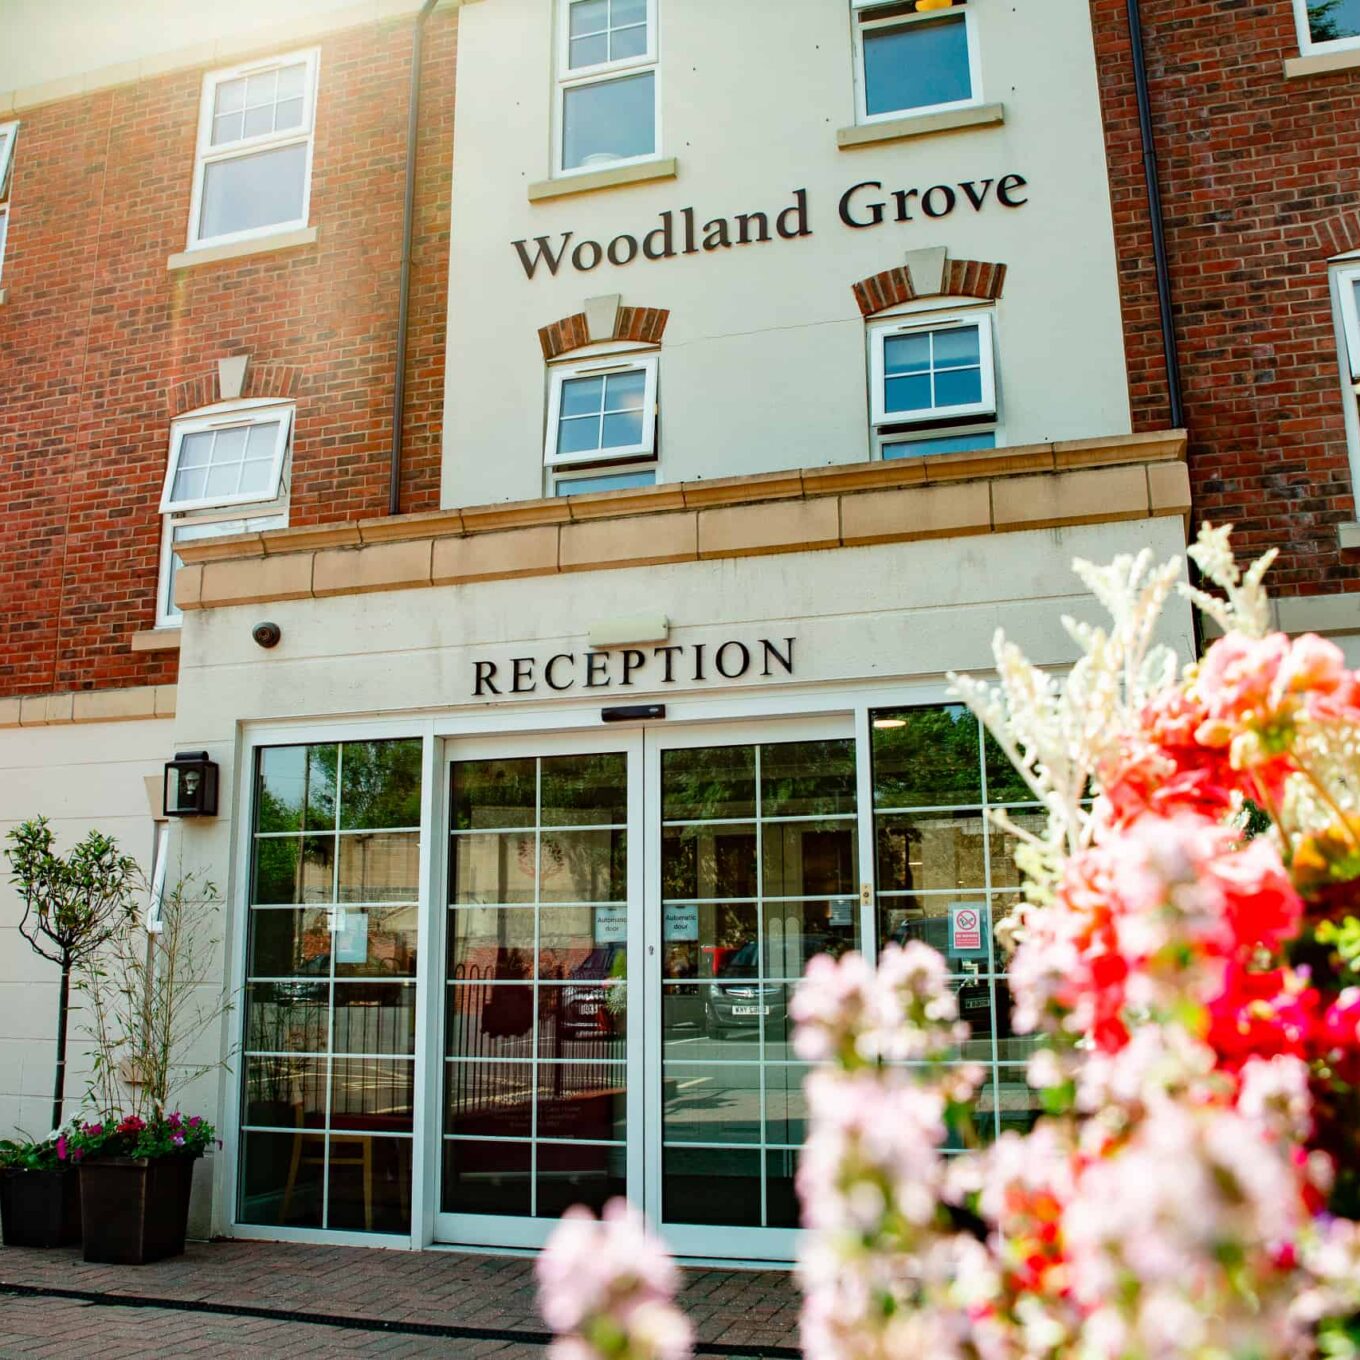 Recption doors at Woodland Grove Care Home in Loughton